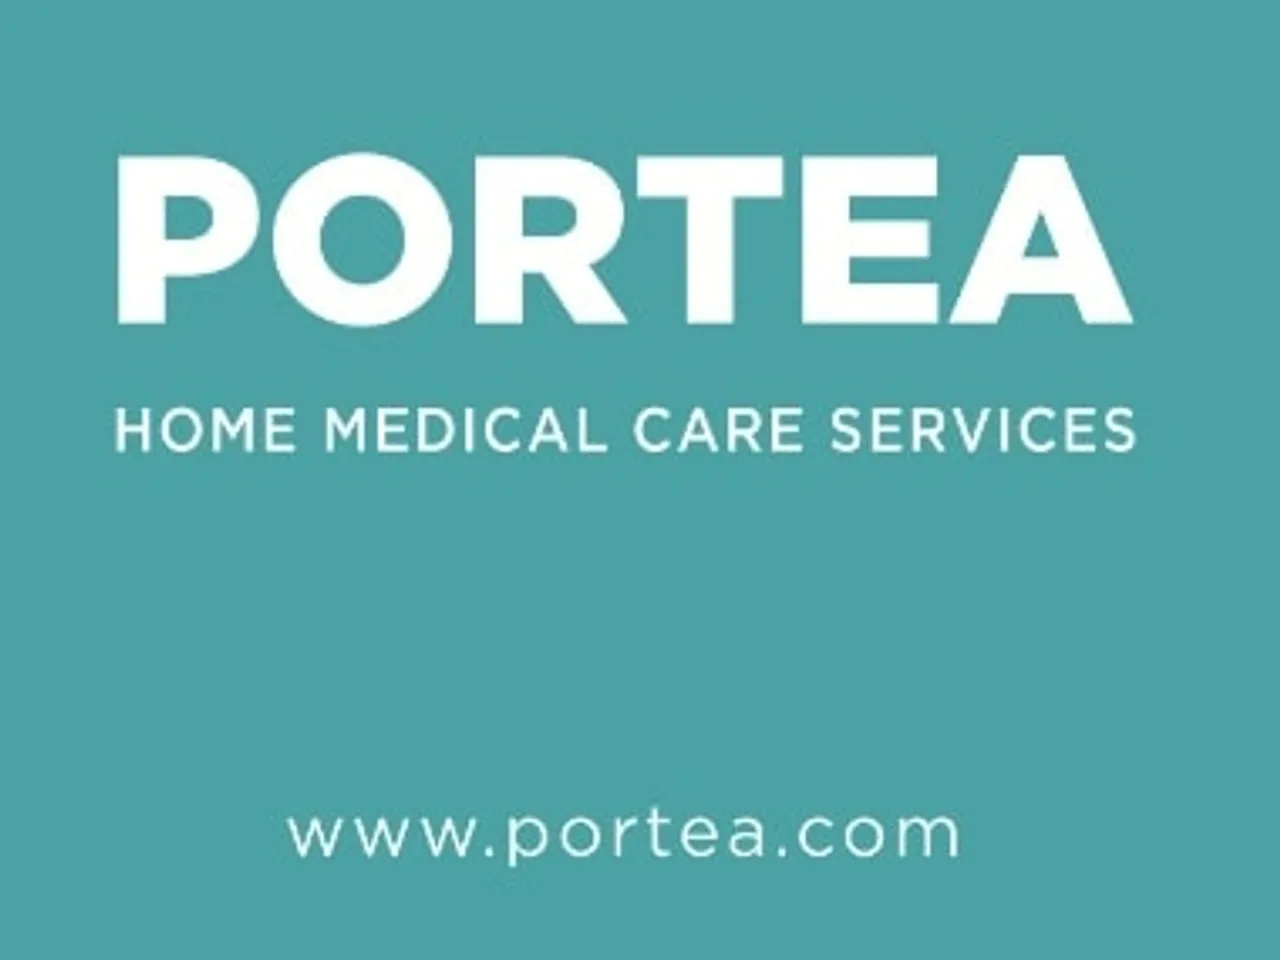 Portea Medical partners Physitrack to give patients access to video consultations